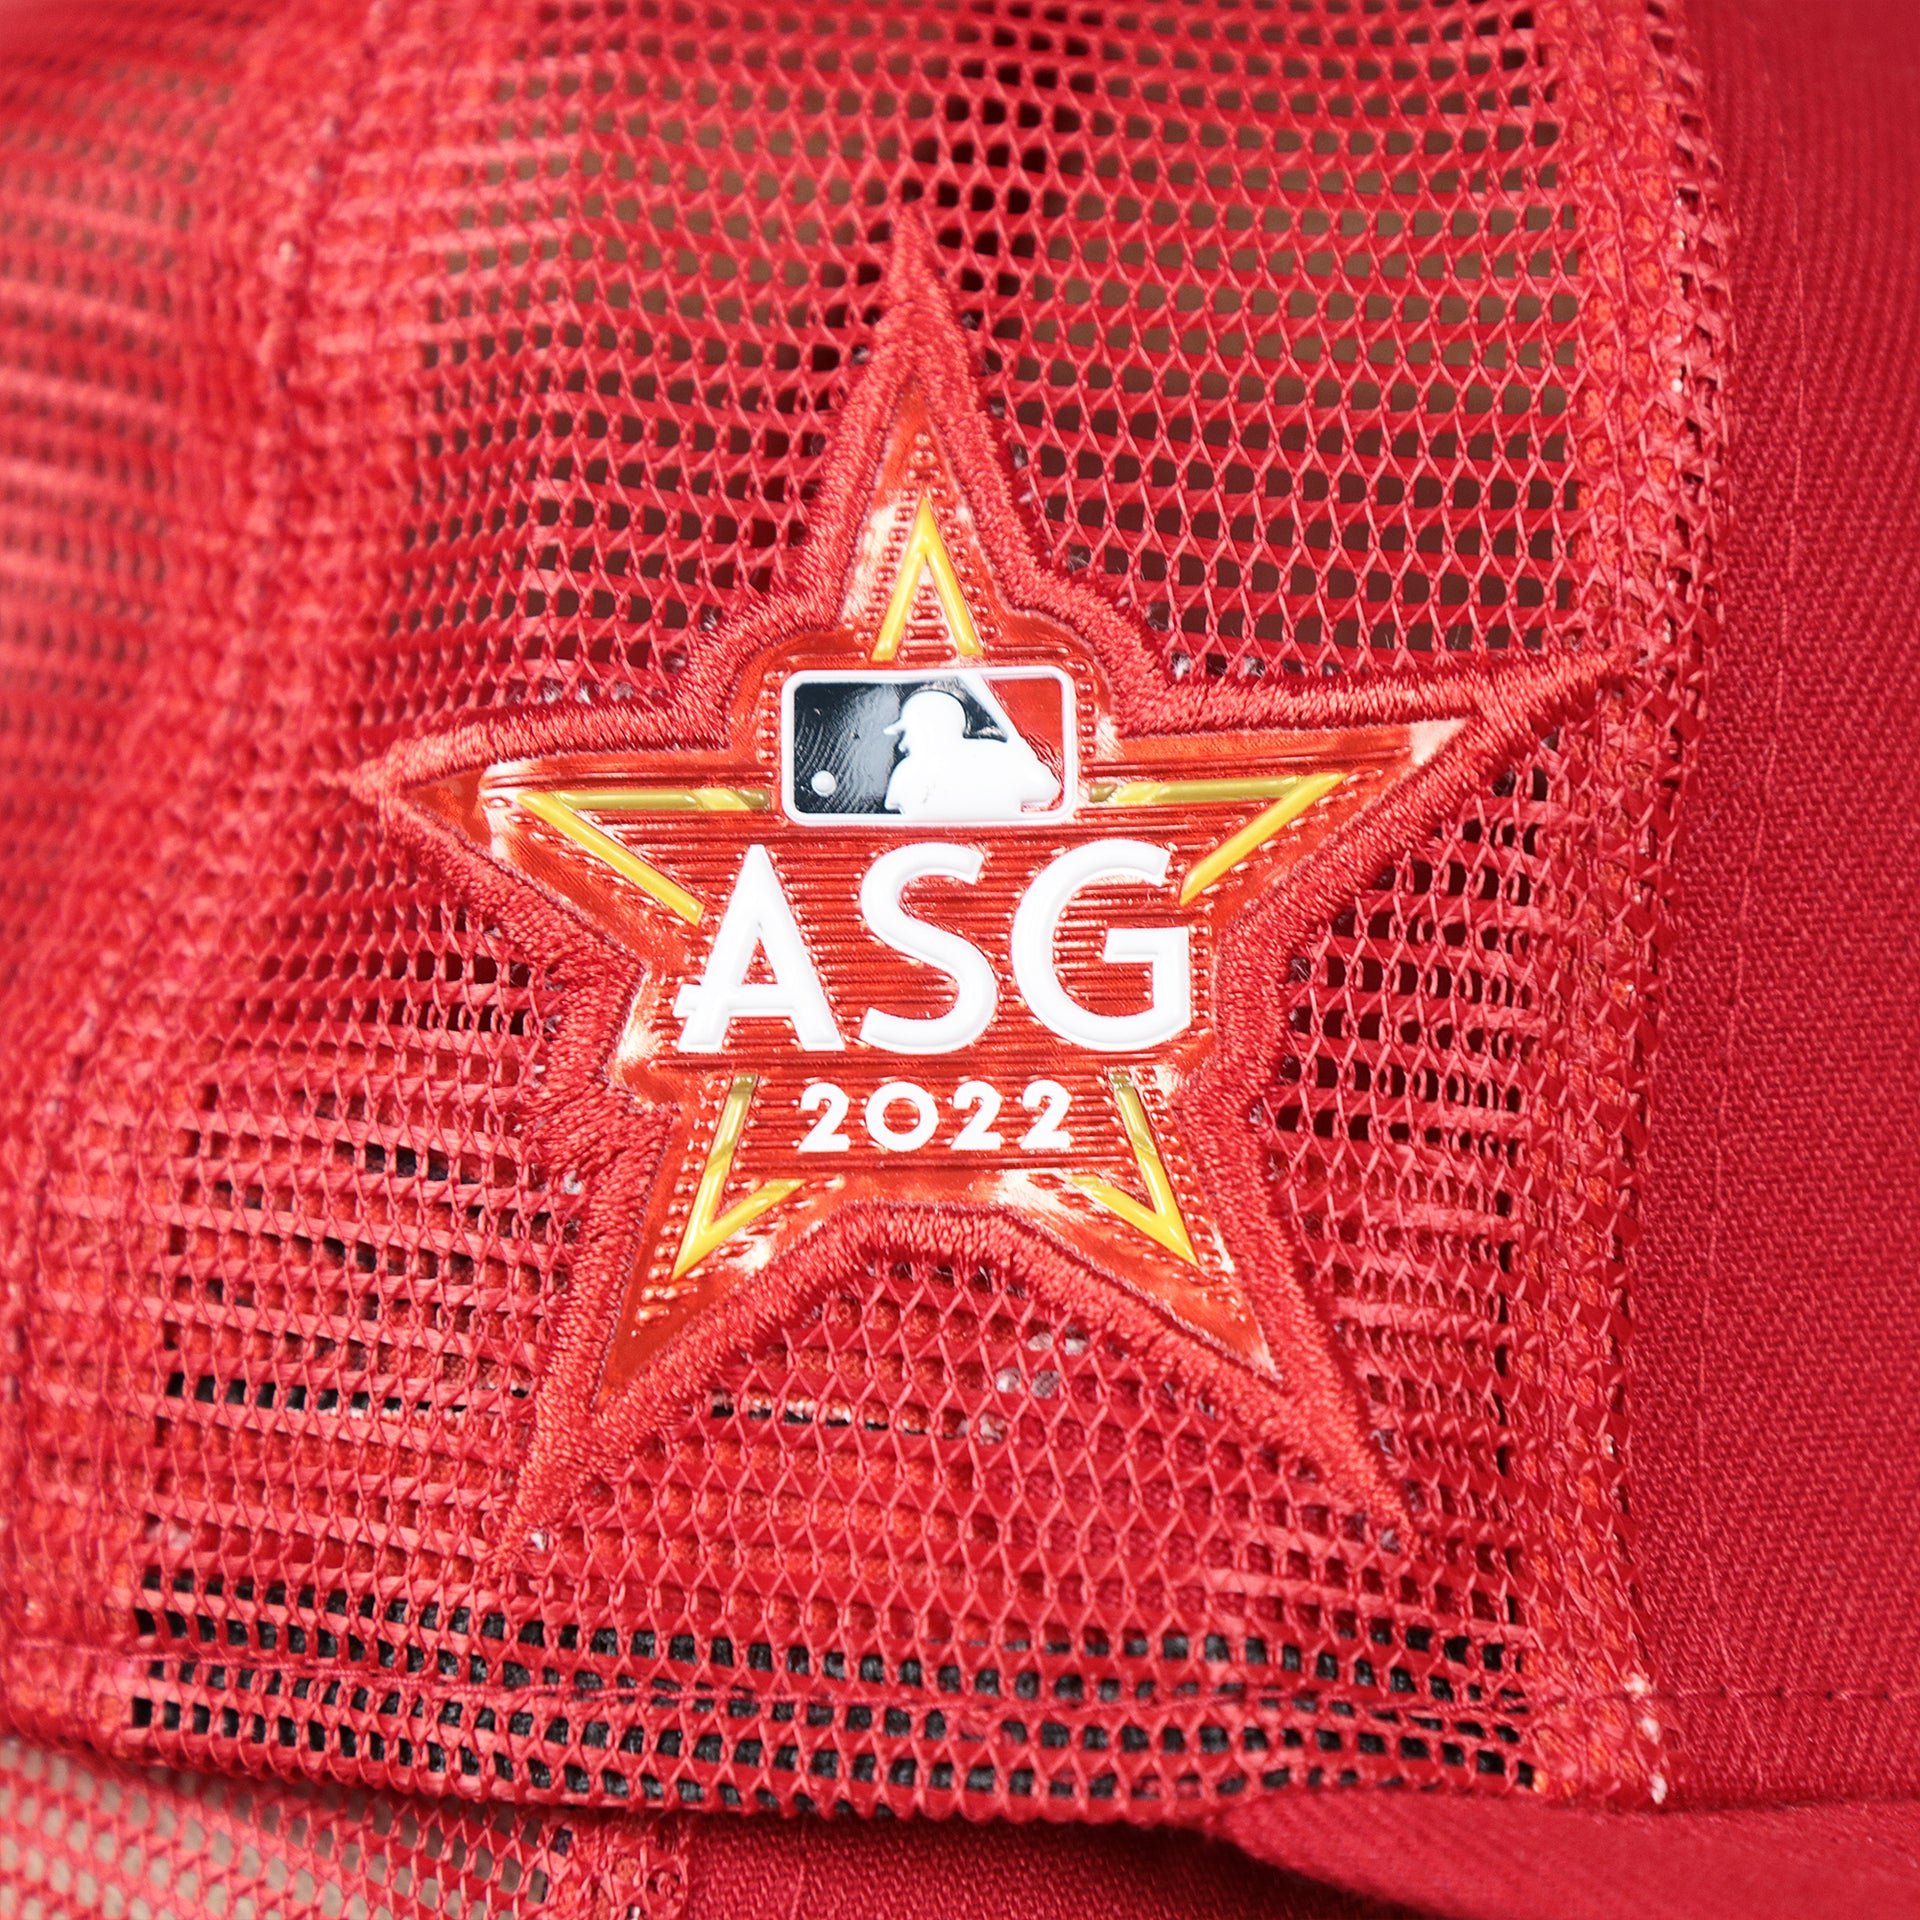 The ASG 2022 Side Patch on the Youth Anaheim Angels MLB 2022 All Star Game Mesh Back 9Fifty Snapback Cap | ASG 2022 Red Trucker Hat